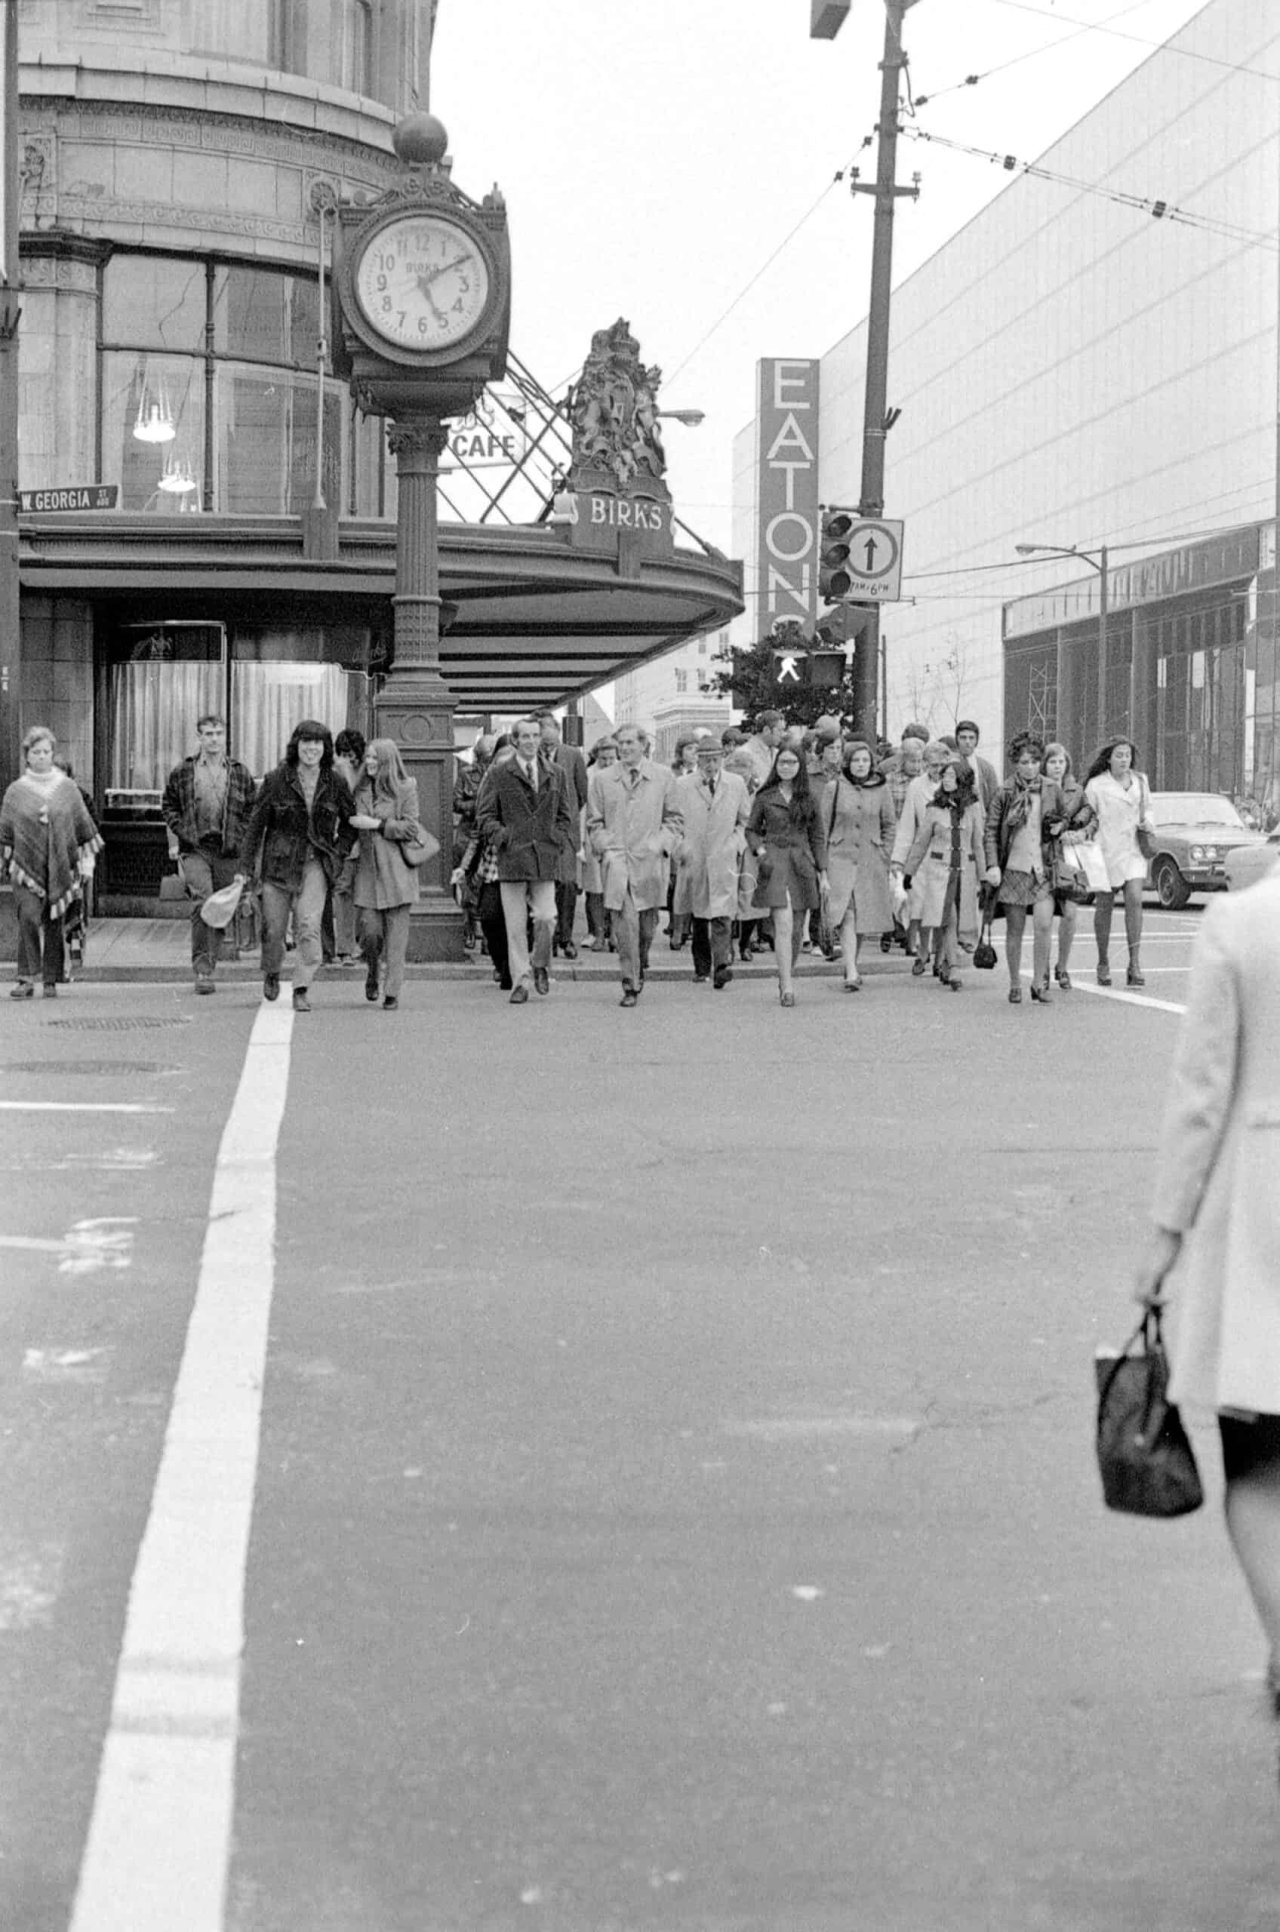 W. Georgia Street and Granville Street east crosswalk, looking southwest, with the Birks Clock visible circa 1972. City of Vancouver Archives, CVA 69-24.08.